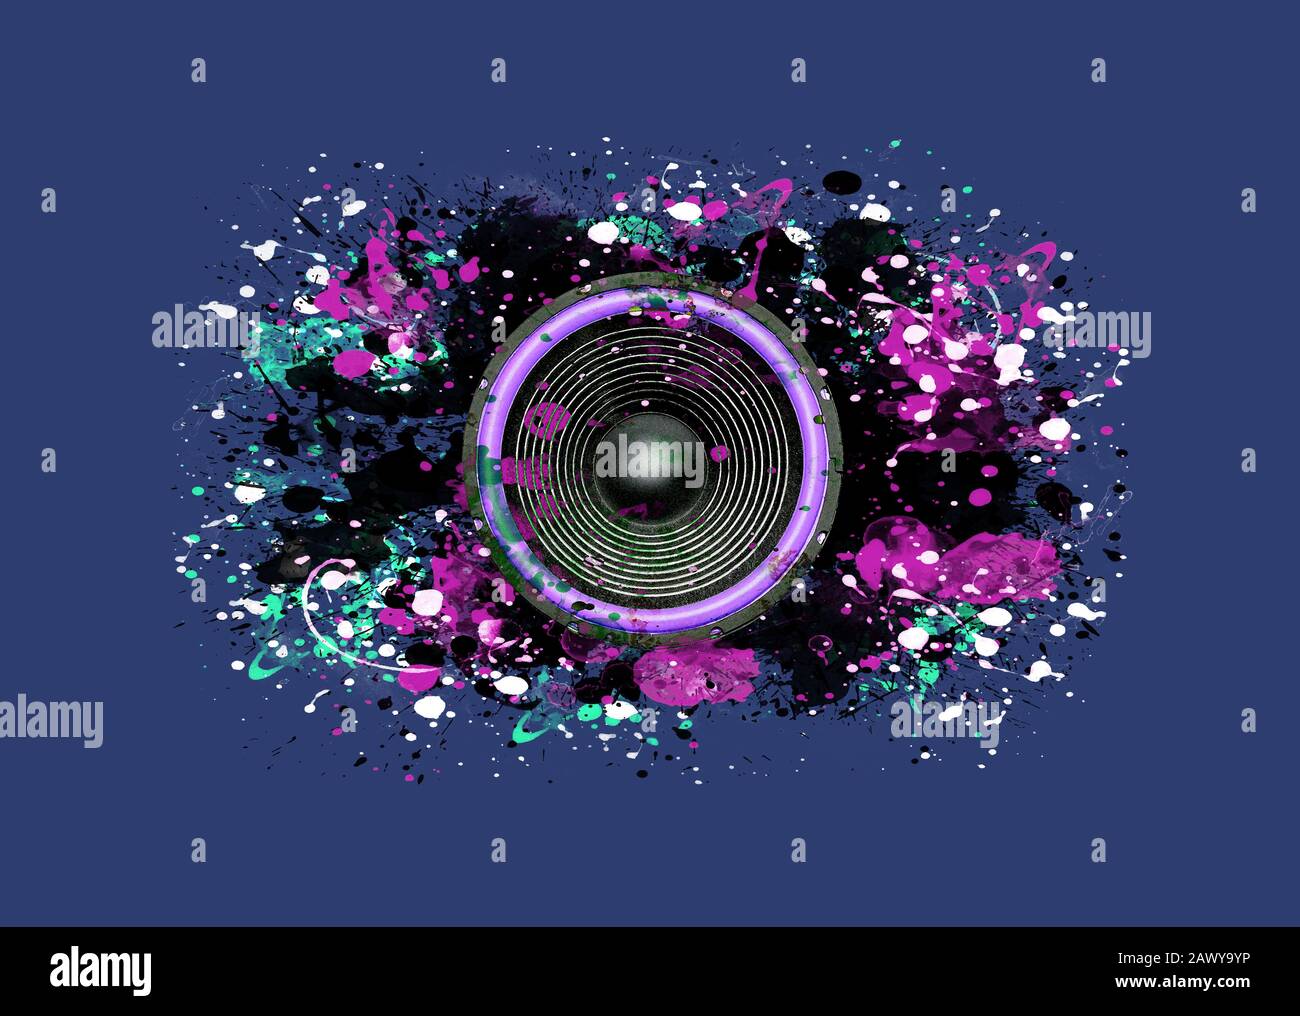 Purple music speaker and splattered paint on a blue background Stock Photo